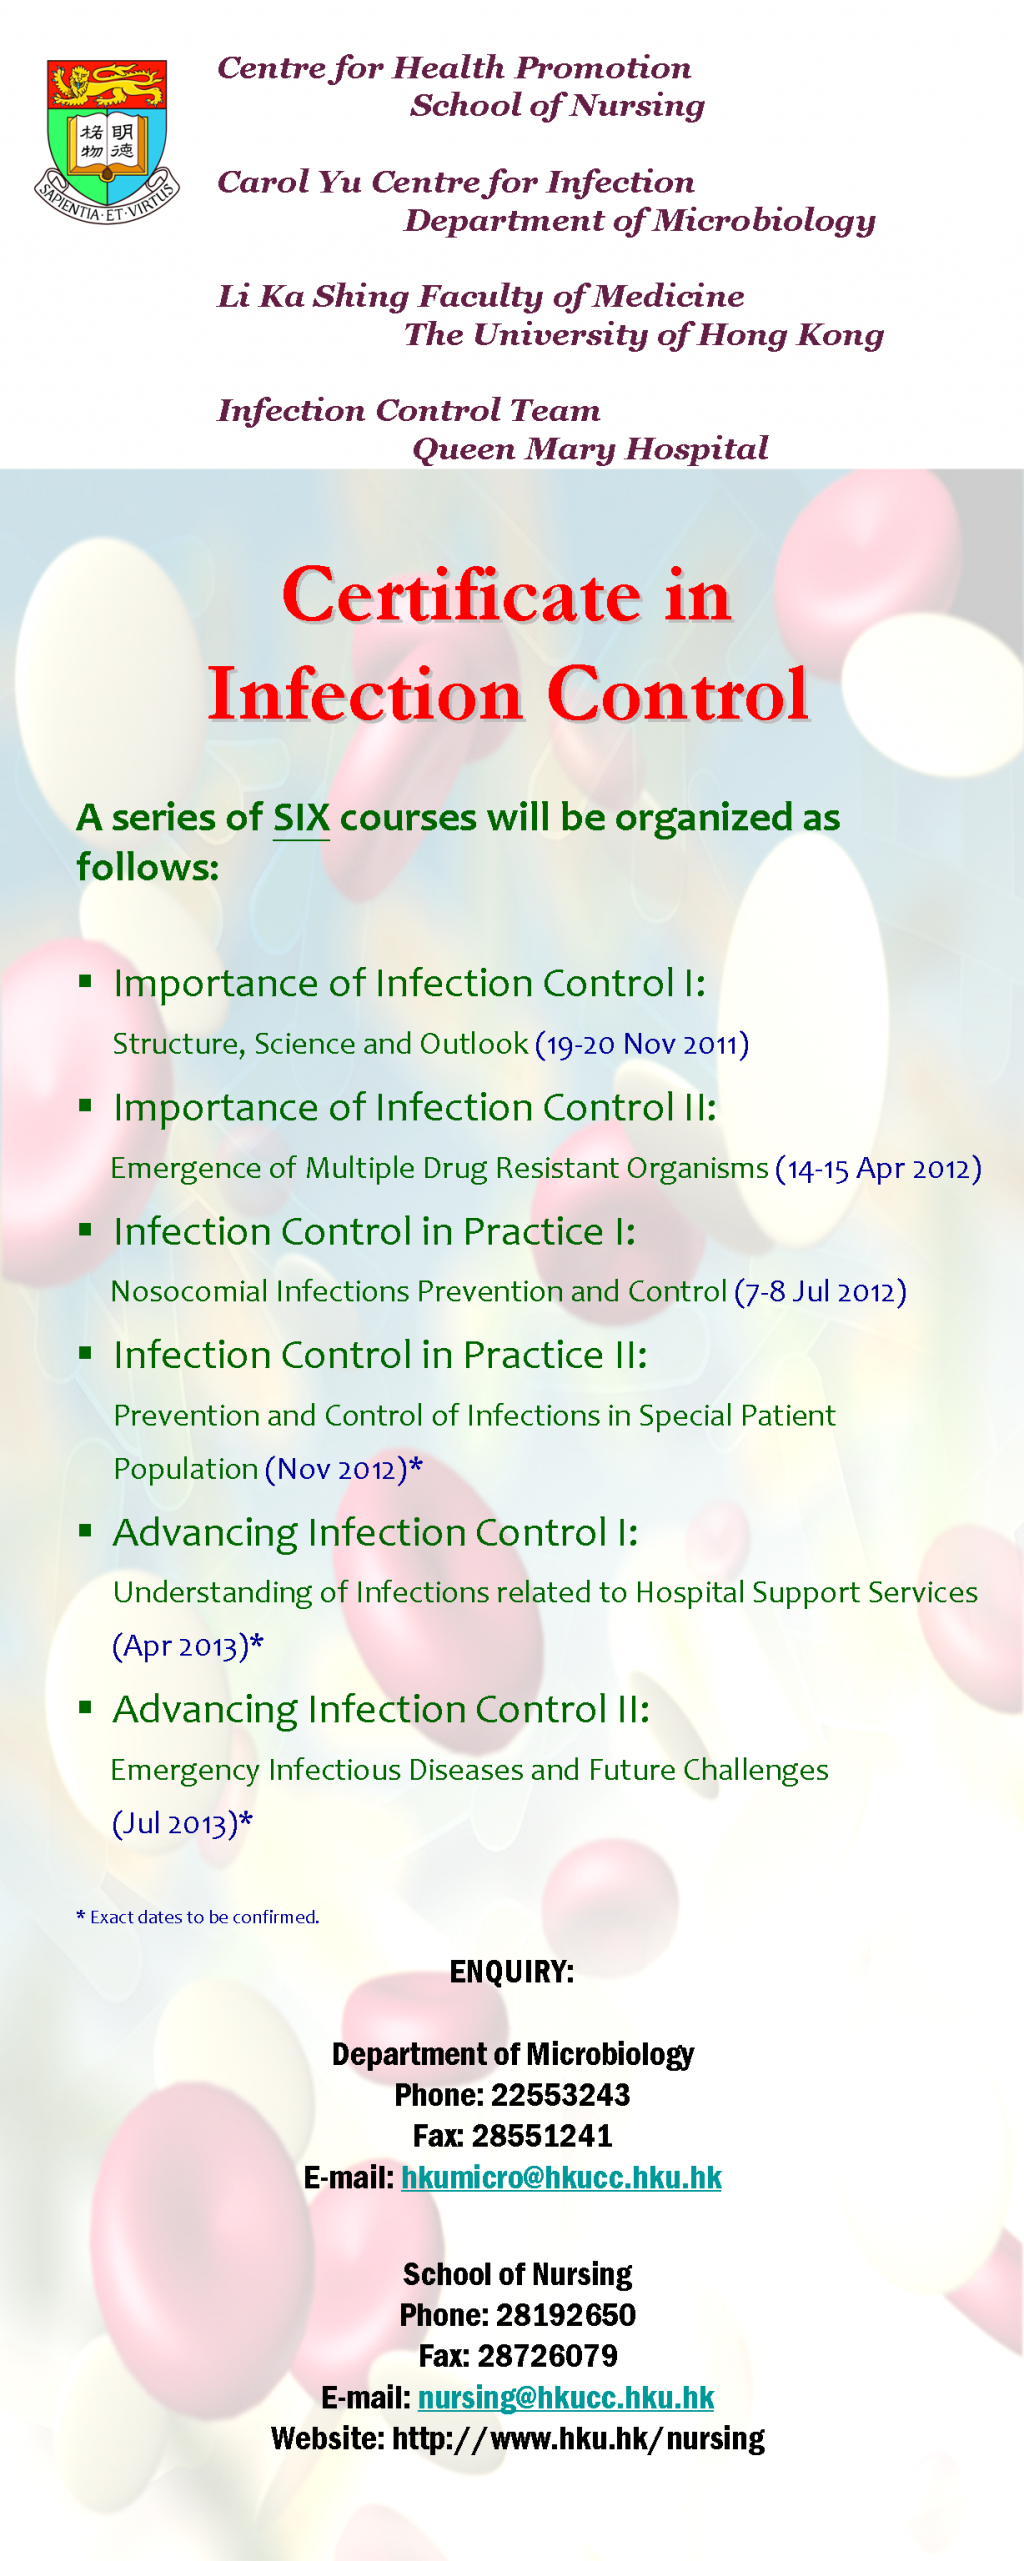 Certificate in Infection Control: 19-20 November 2011